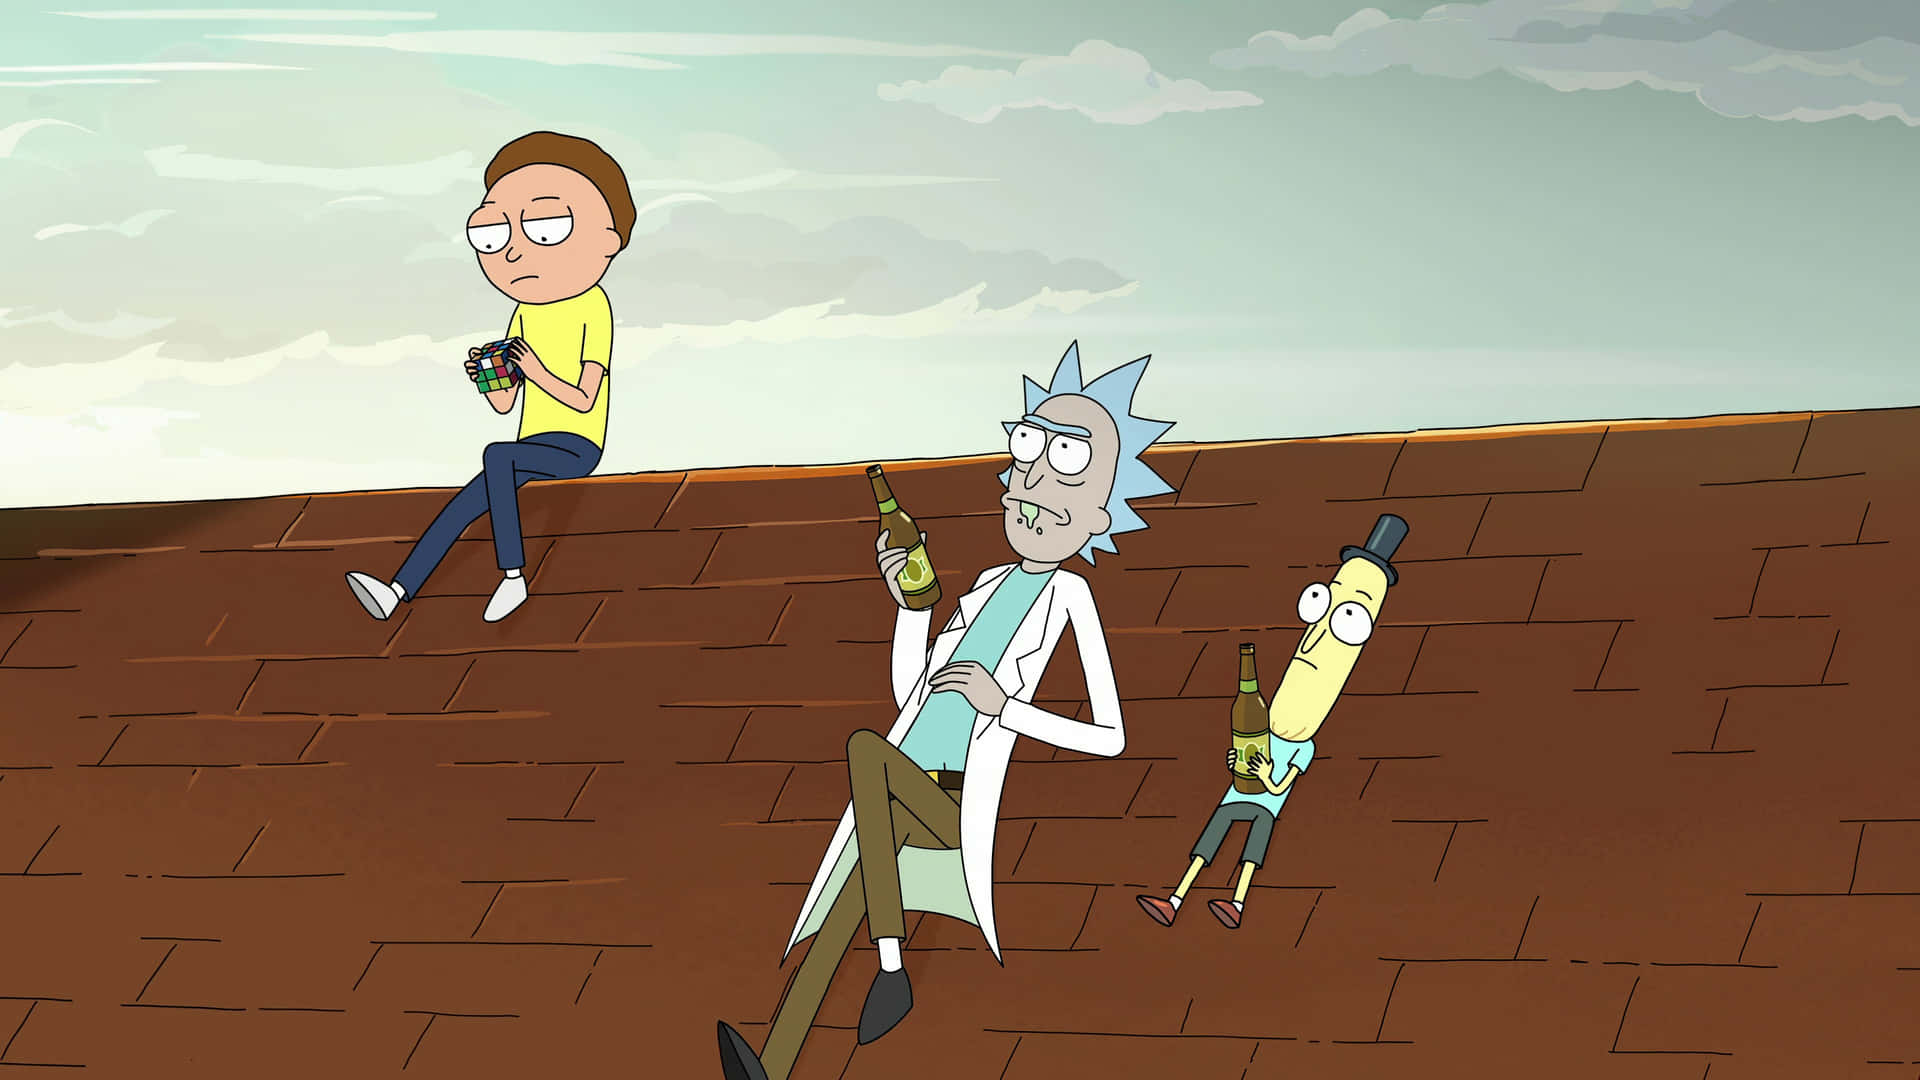 Rick And Morty wallpapers for desktop, download free Rick And Morty  pictures and backgrounds for PC